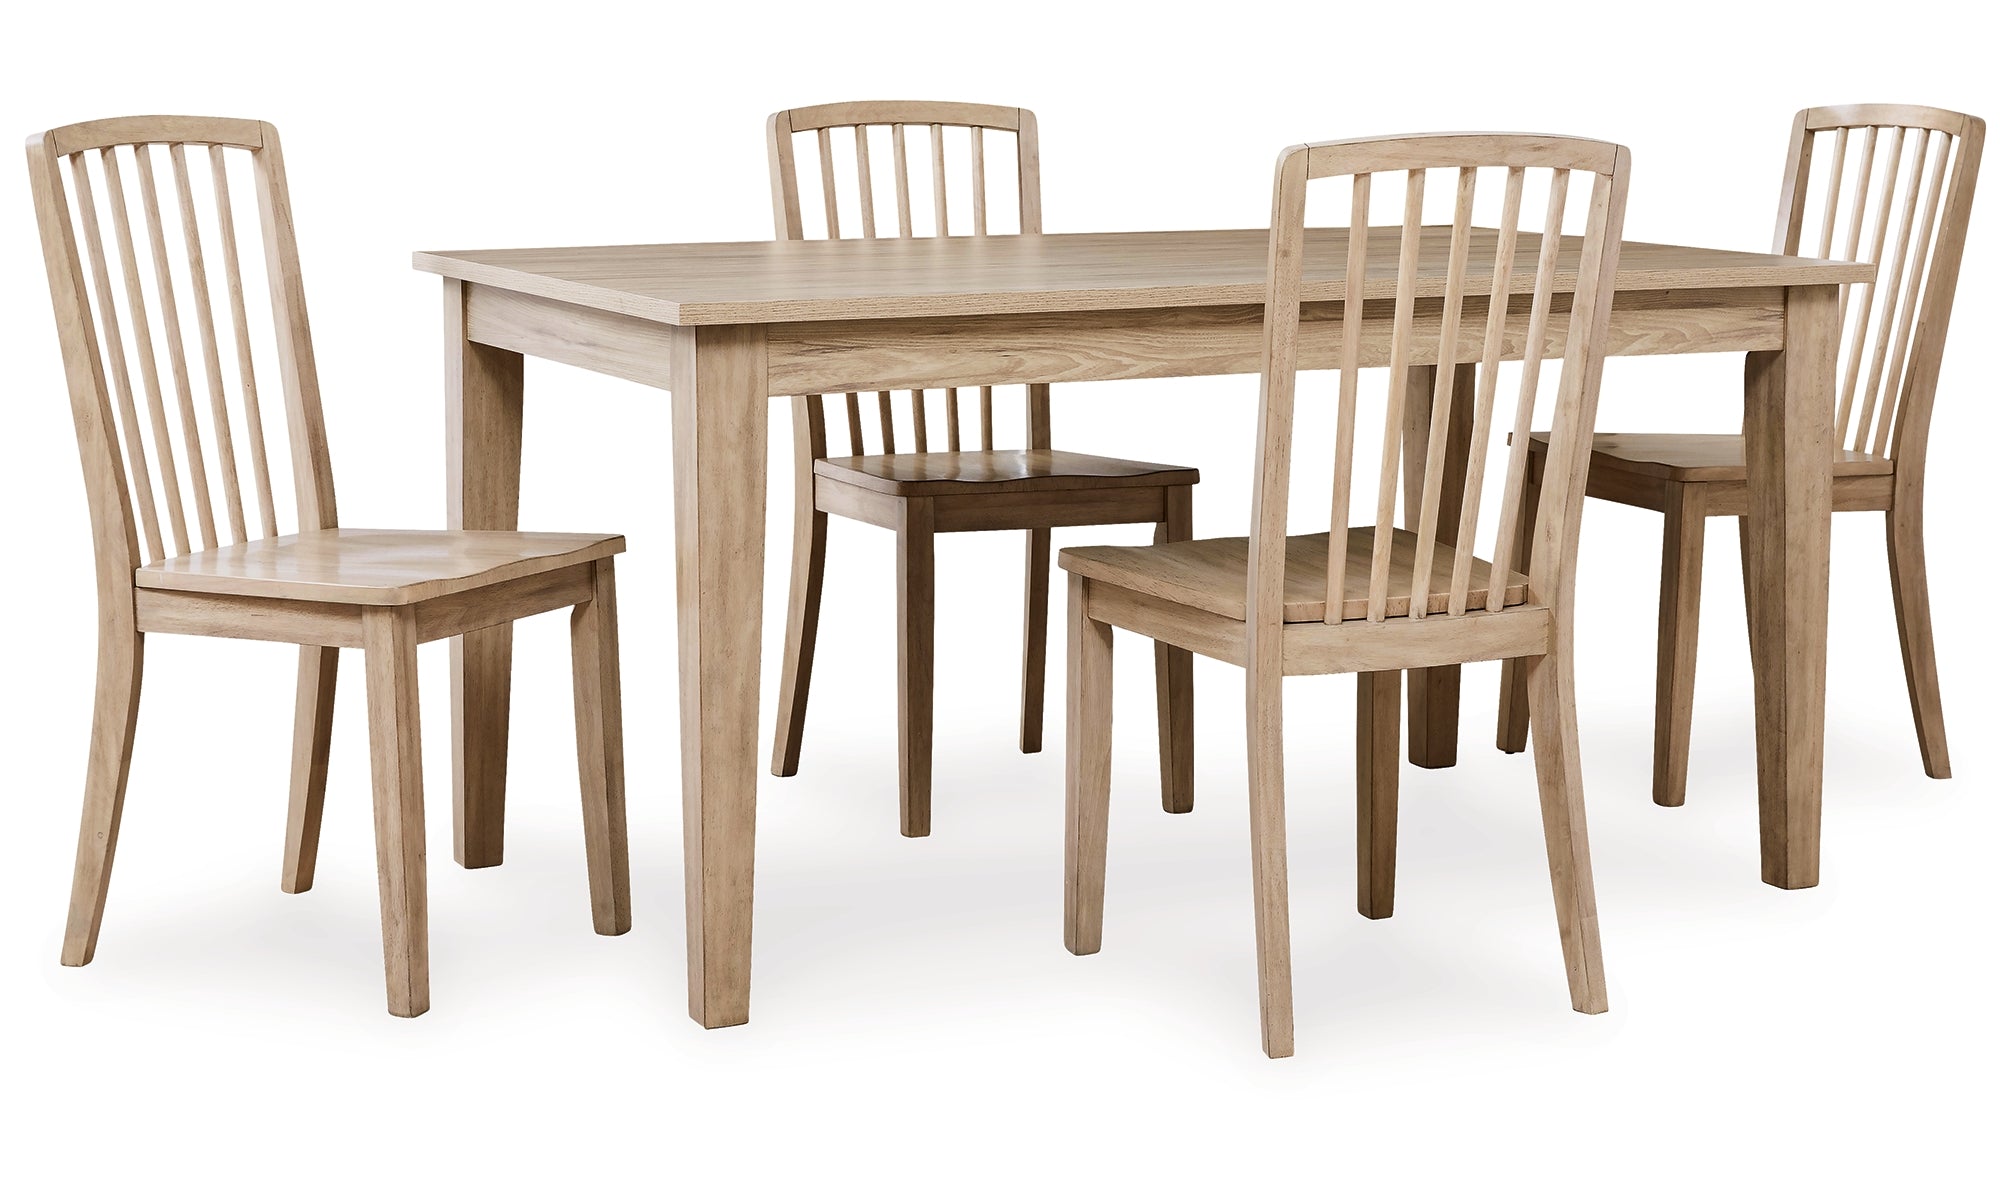 Gleanville Dining Table and 4 Chairs